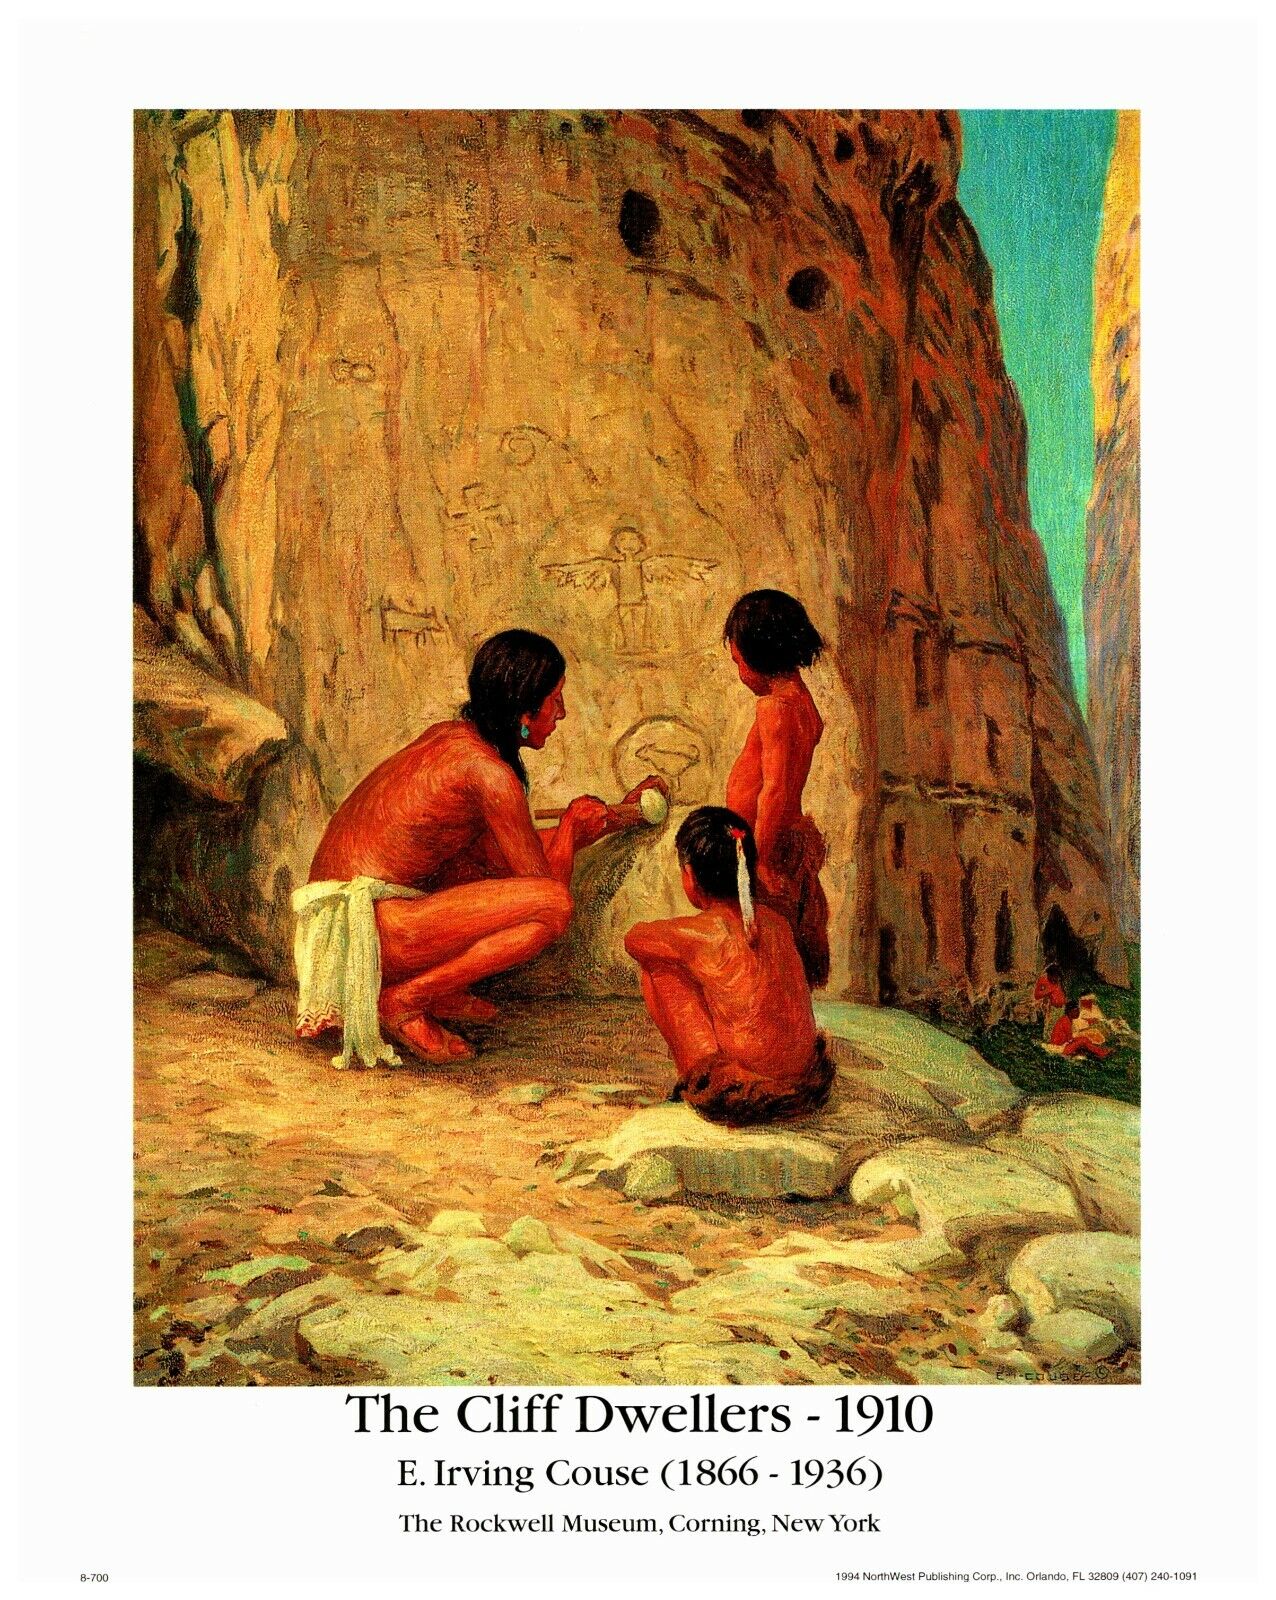 The Cliff Dwellers 1910 The Rockwell 1994 NorthWest Publishing Corp 8x10